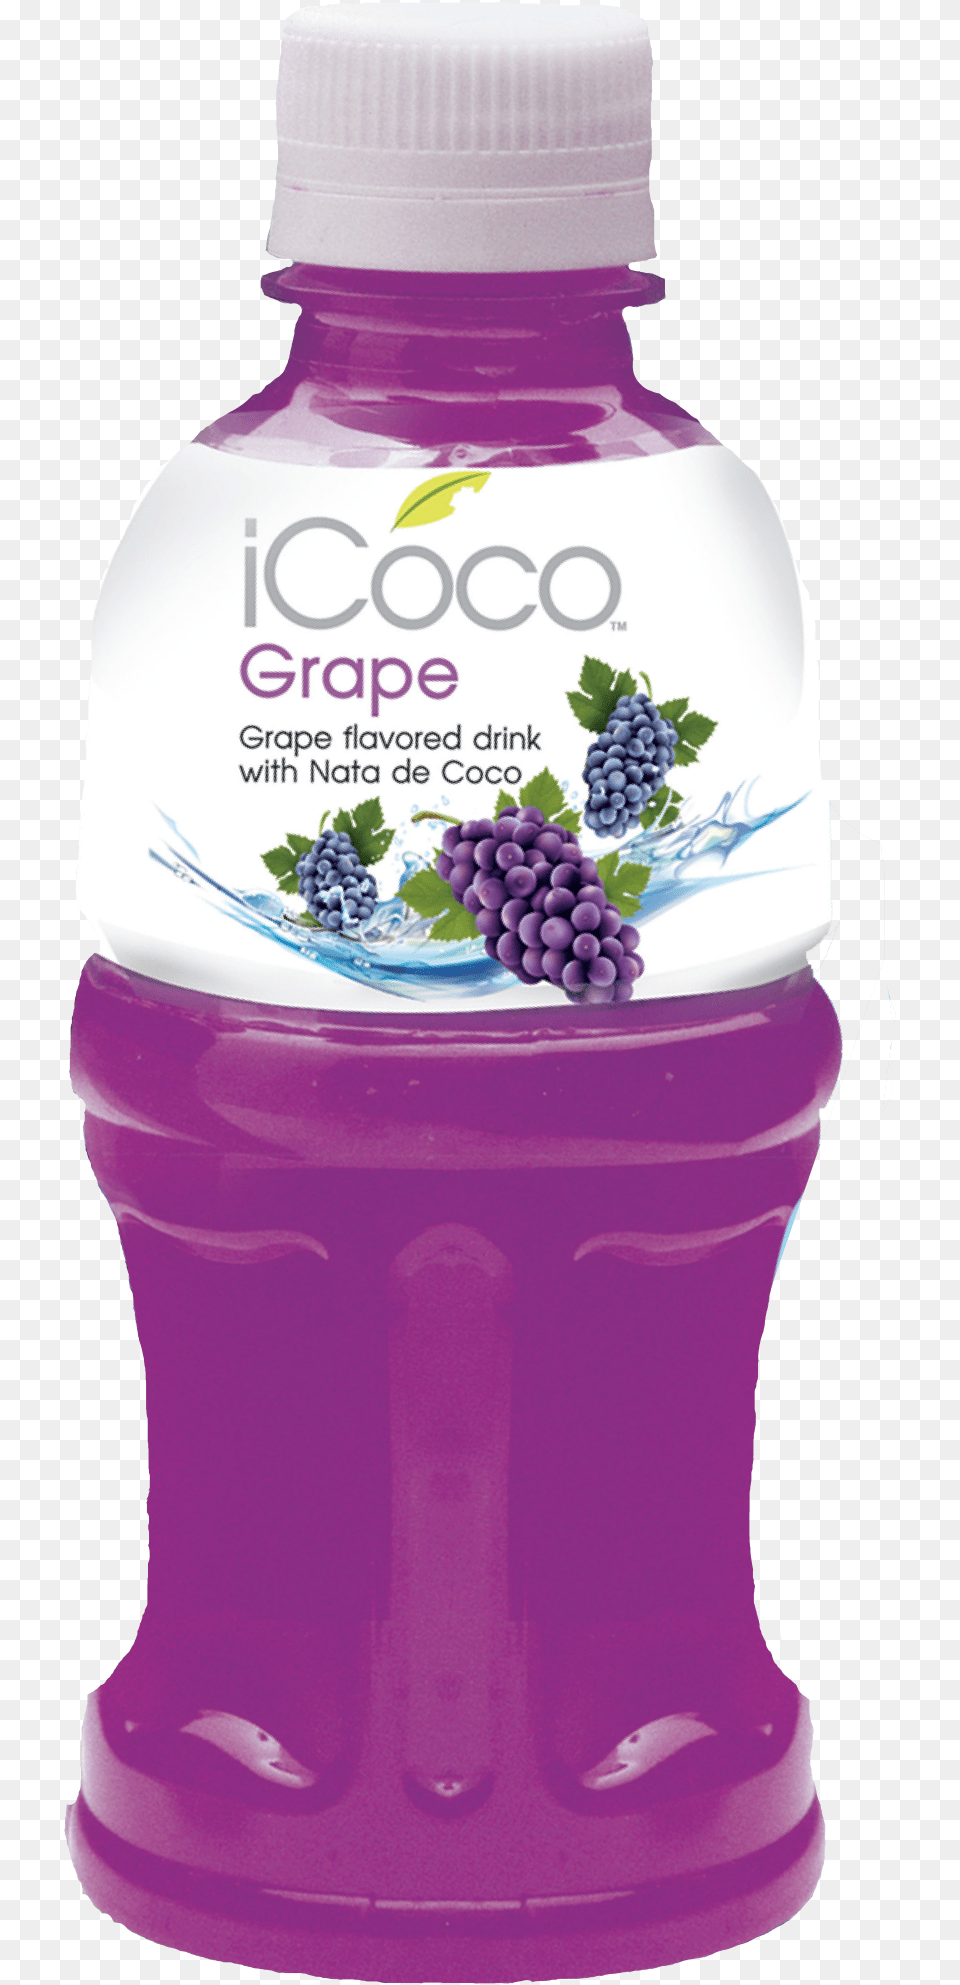 Icoco Fruit Juice With Nata De Coco Grapes Icoco Juice, Bottle, Beverage Free Png Download